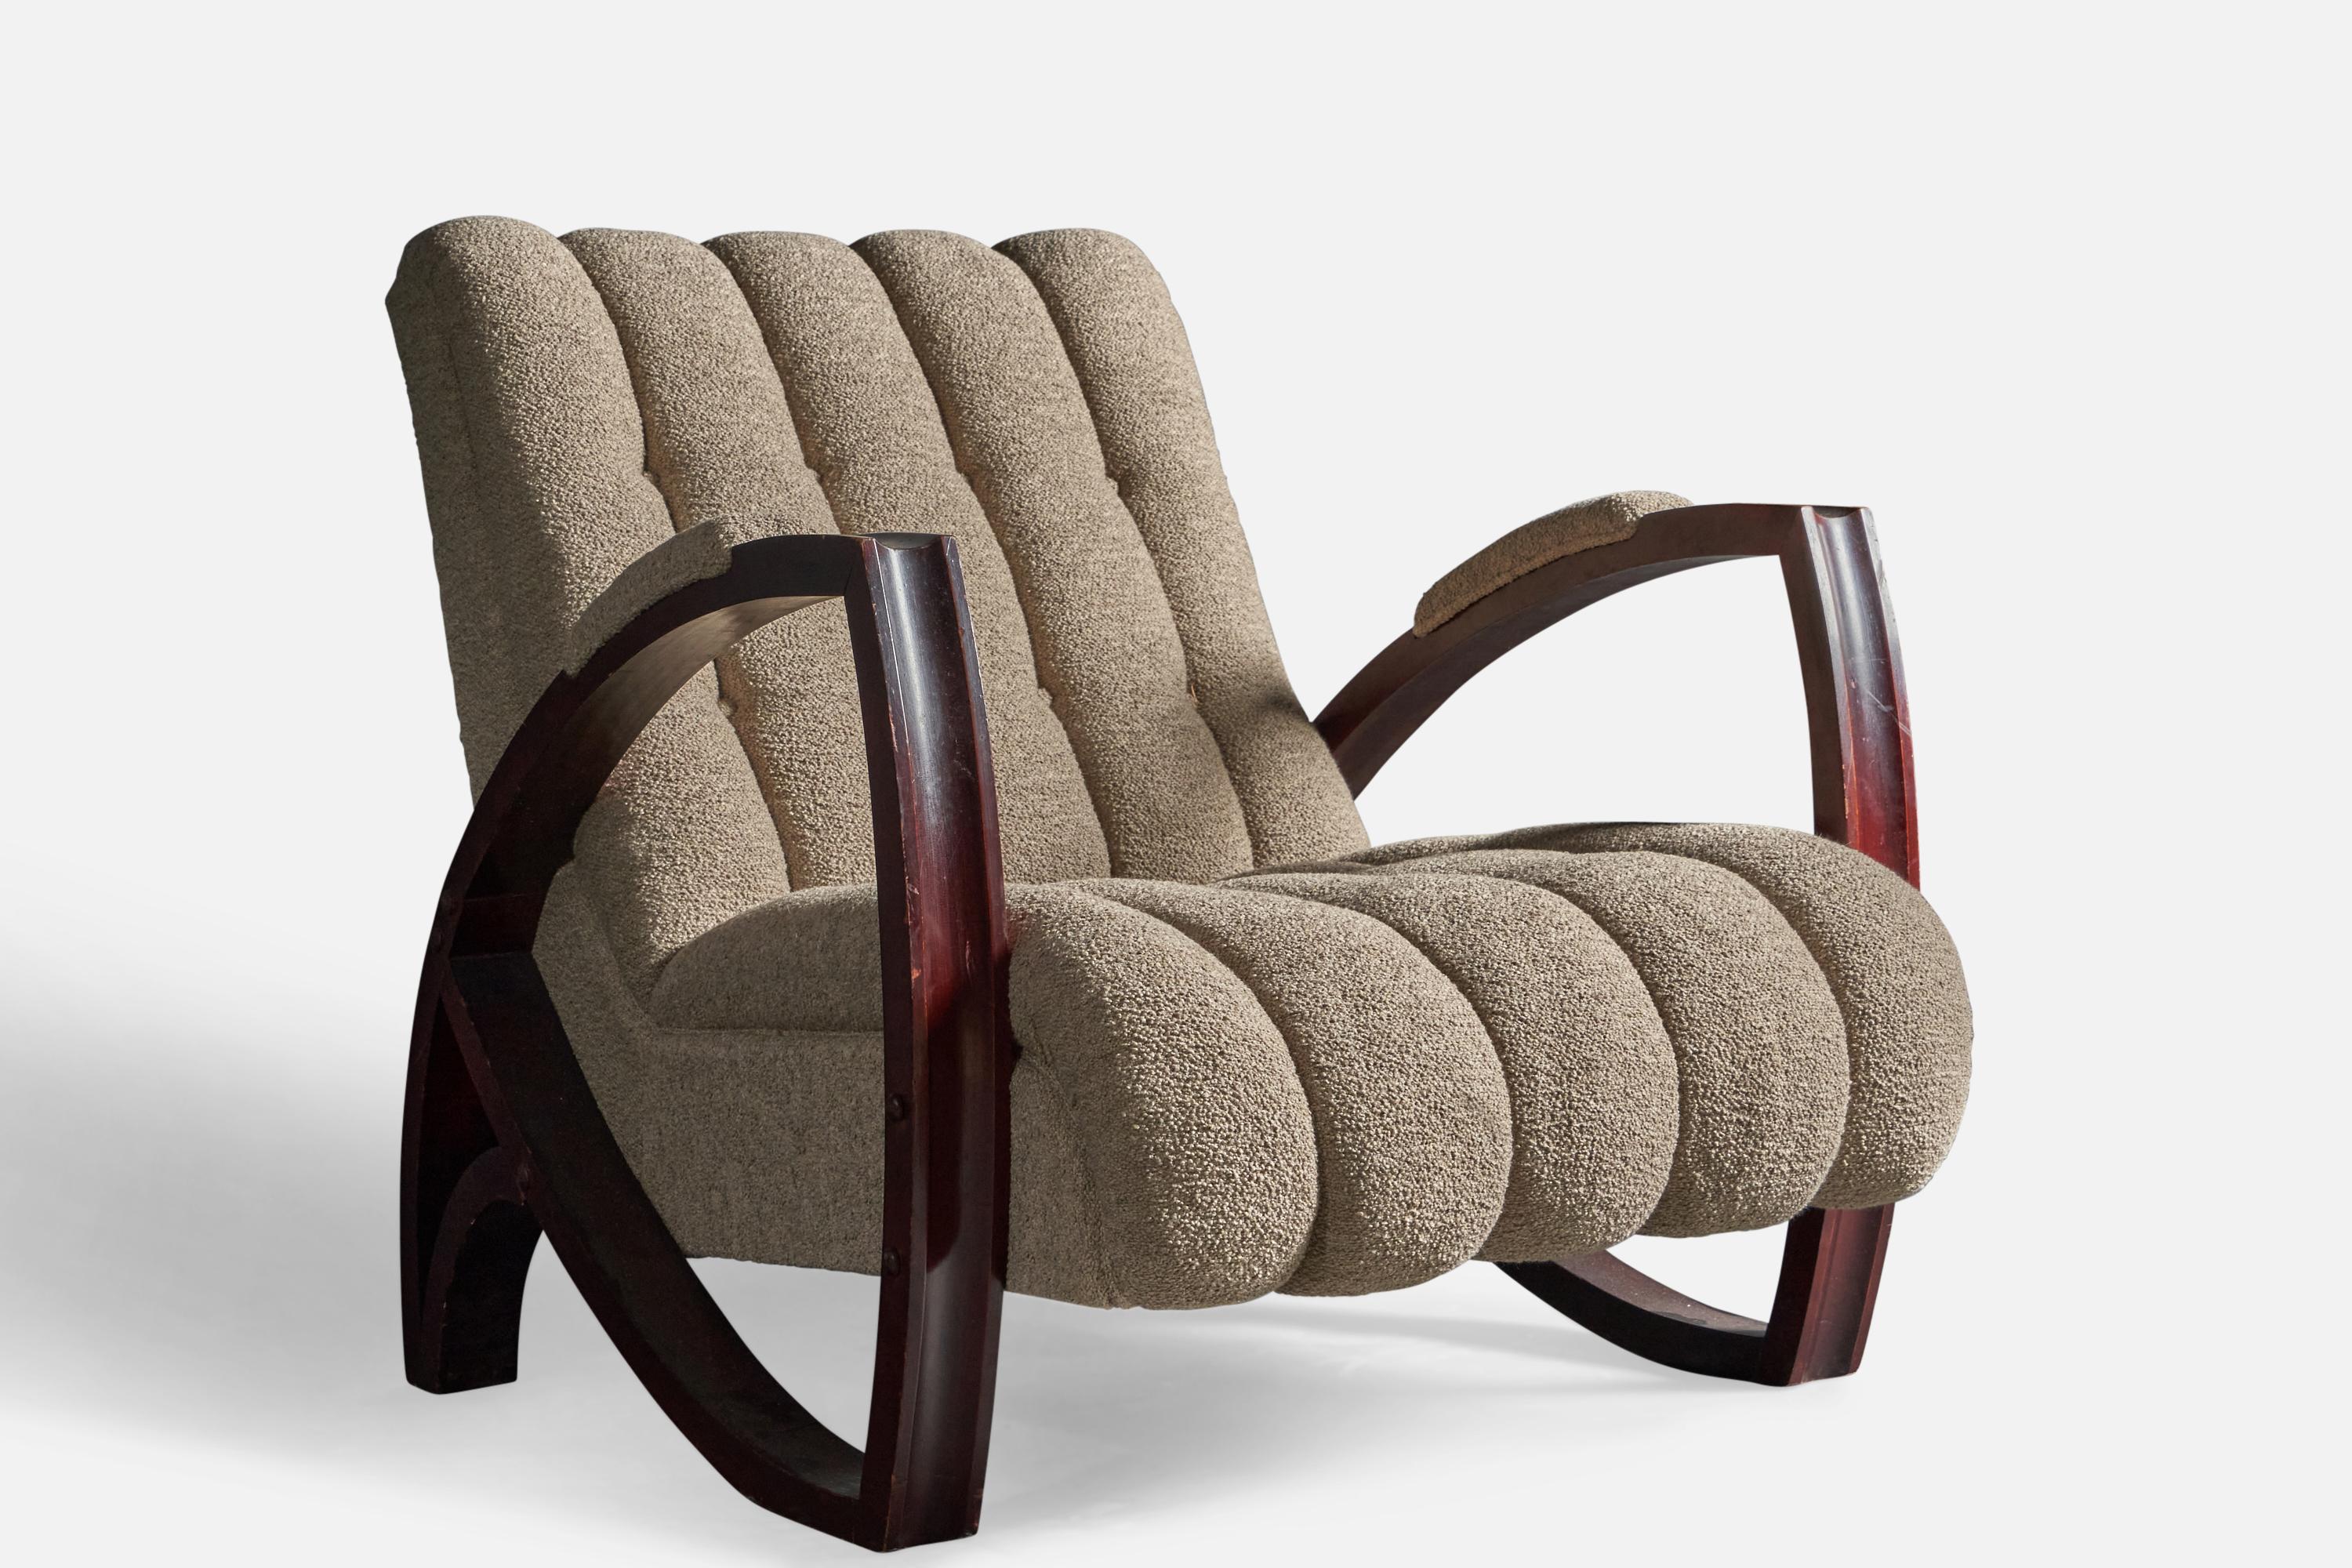 A dark-stained wood and beige grey fabric lounge chair, designed and produced in Italy, 1930s.